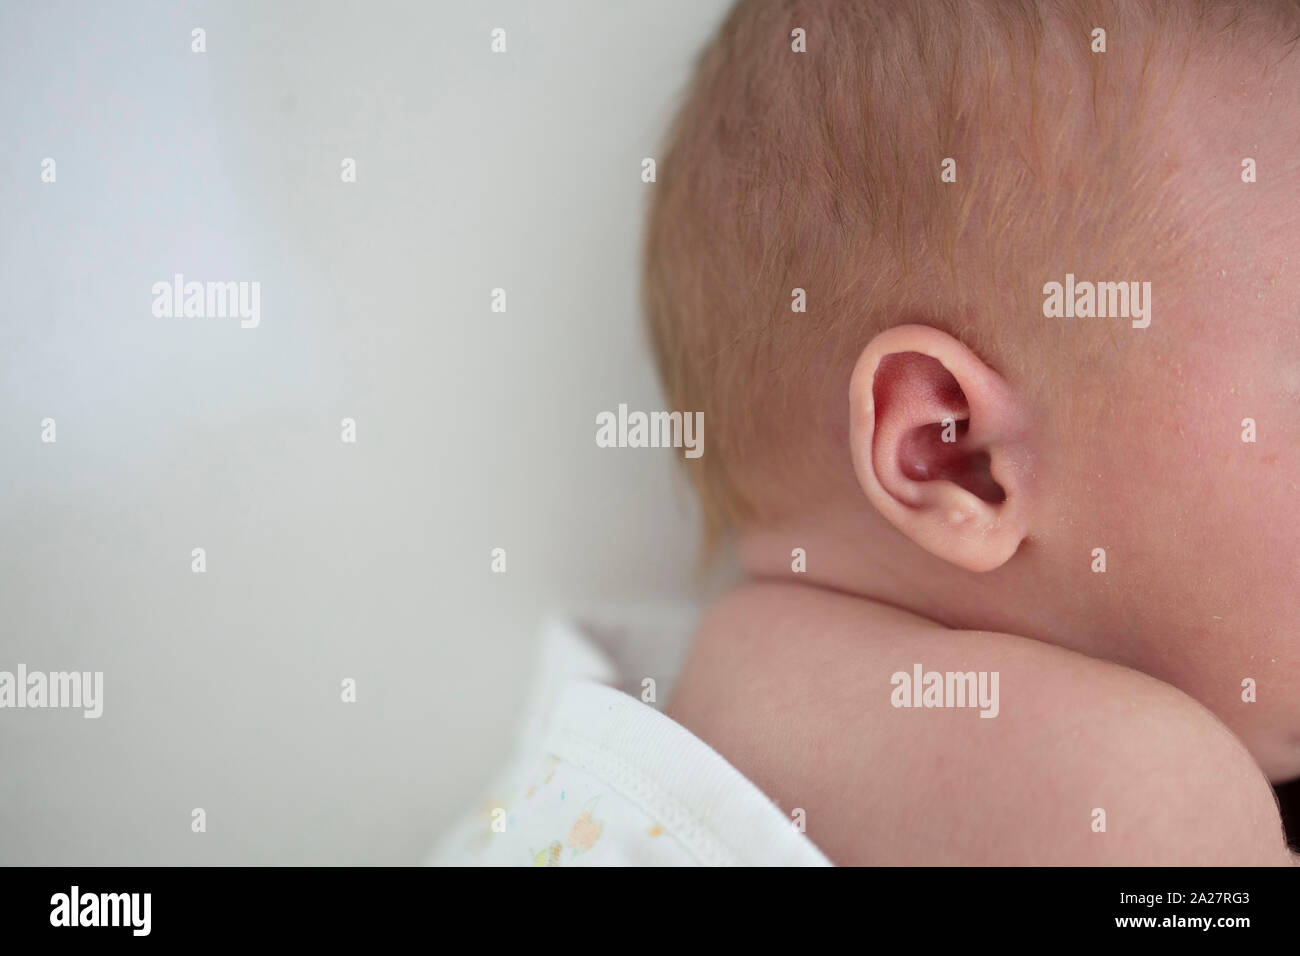 Close up of a newborn baby ear. hearing concept Stock Photo